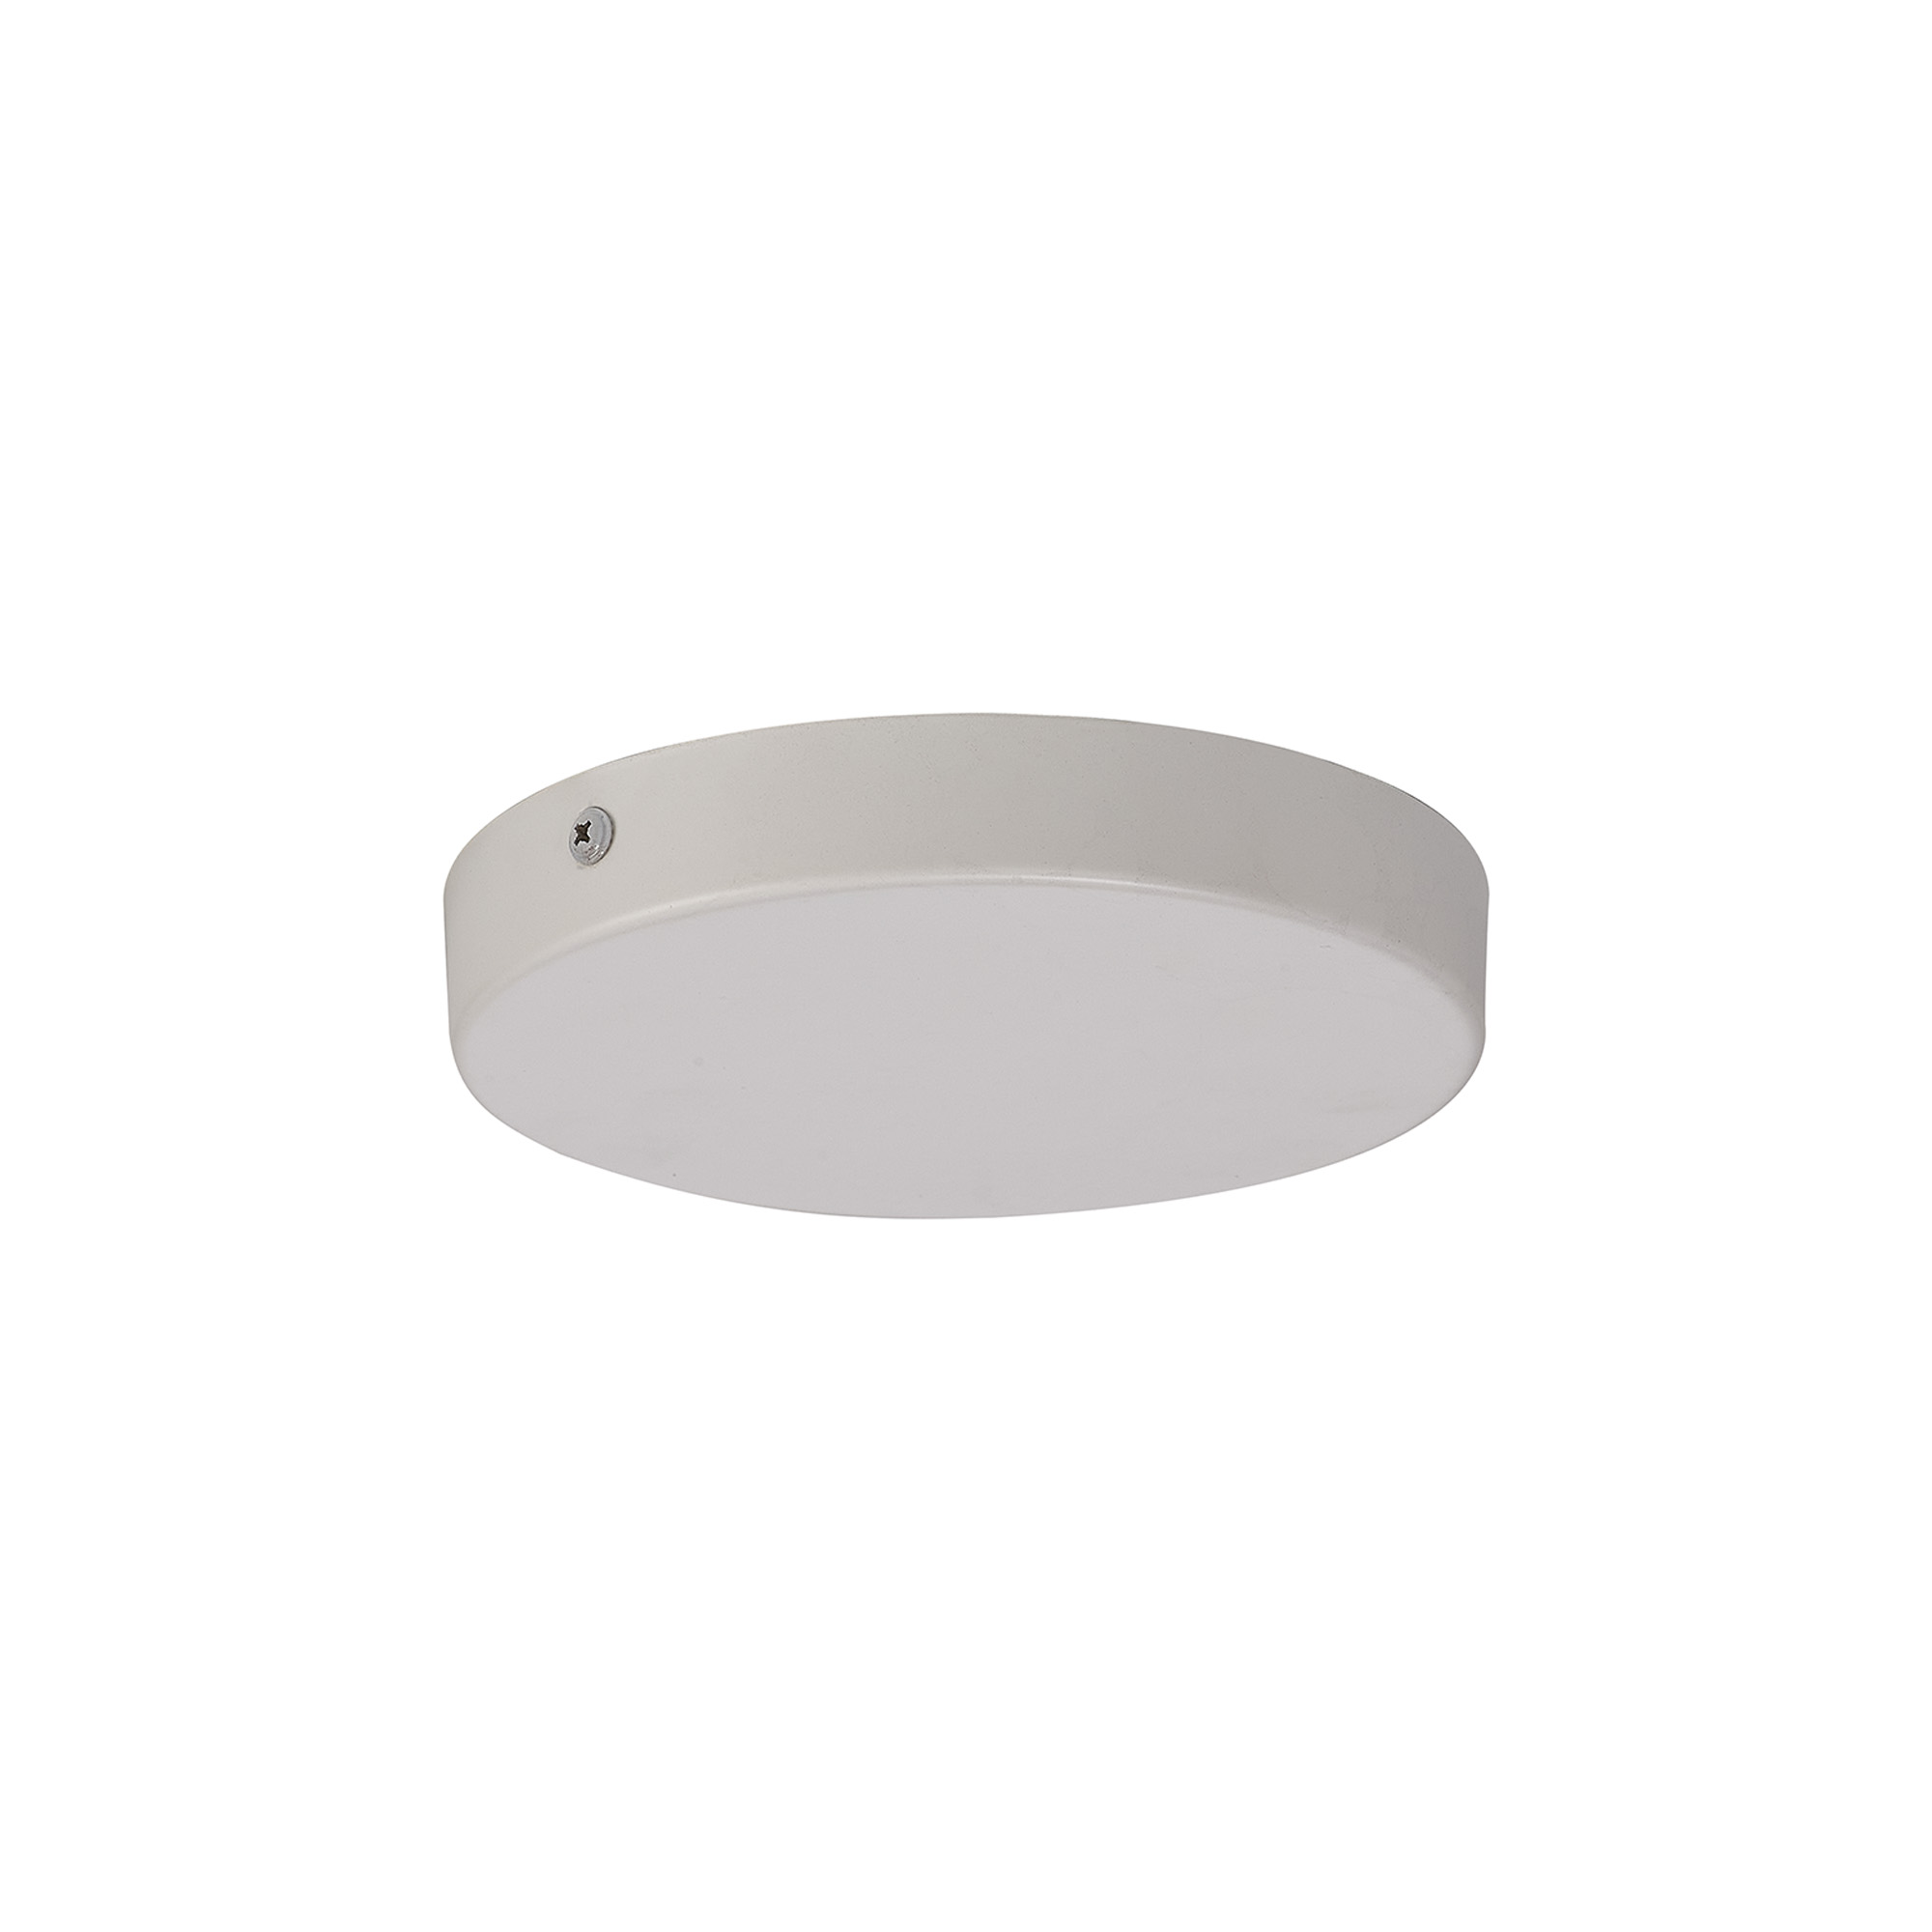 D0828WH/NH  Hayes No Hole 15cm Round Ceiling Plate White